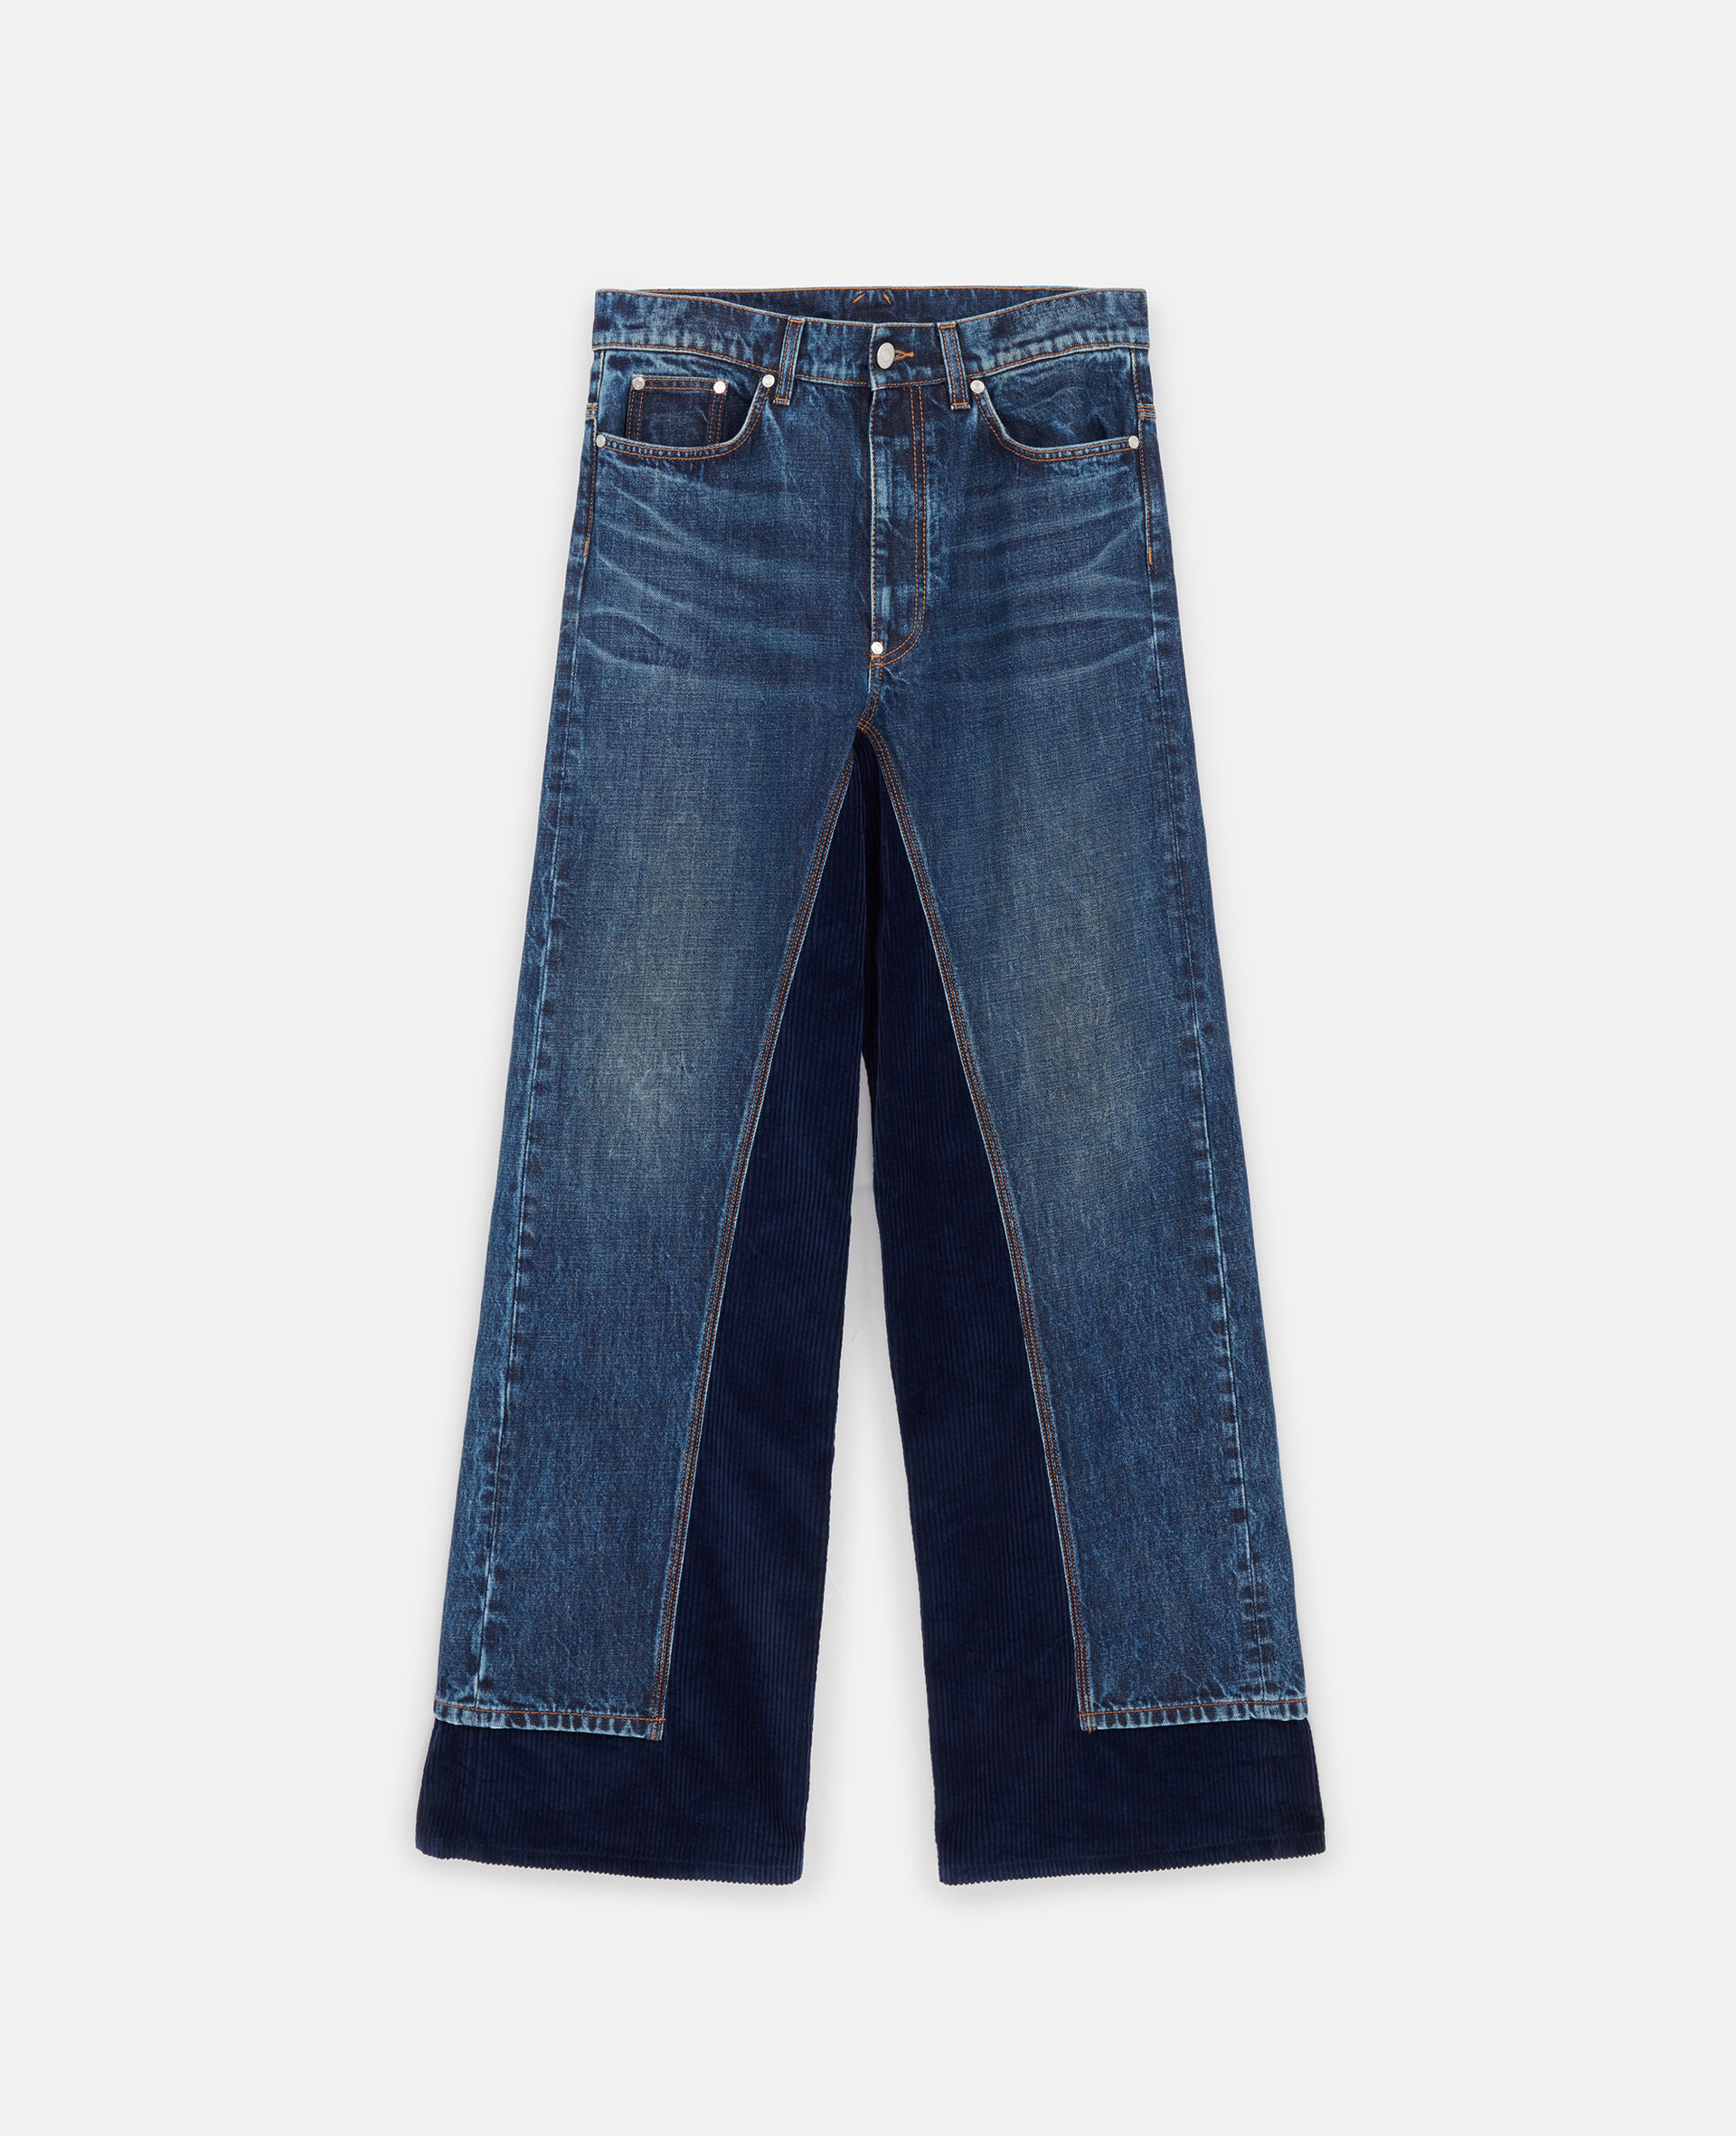 Gerade Cord Jeans mit hoher Taille-Blau-large image number 0